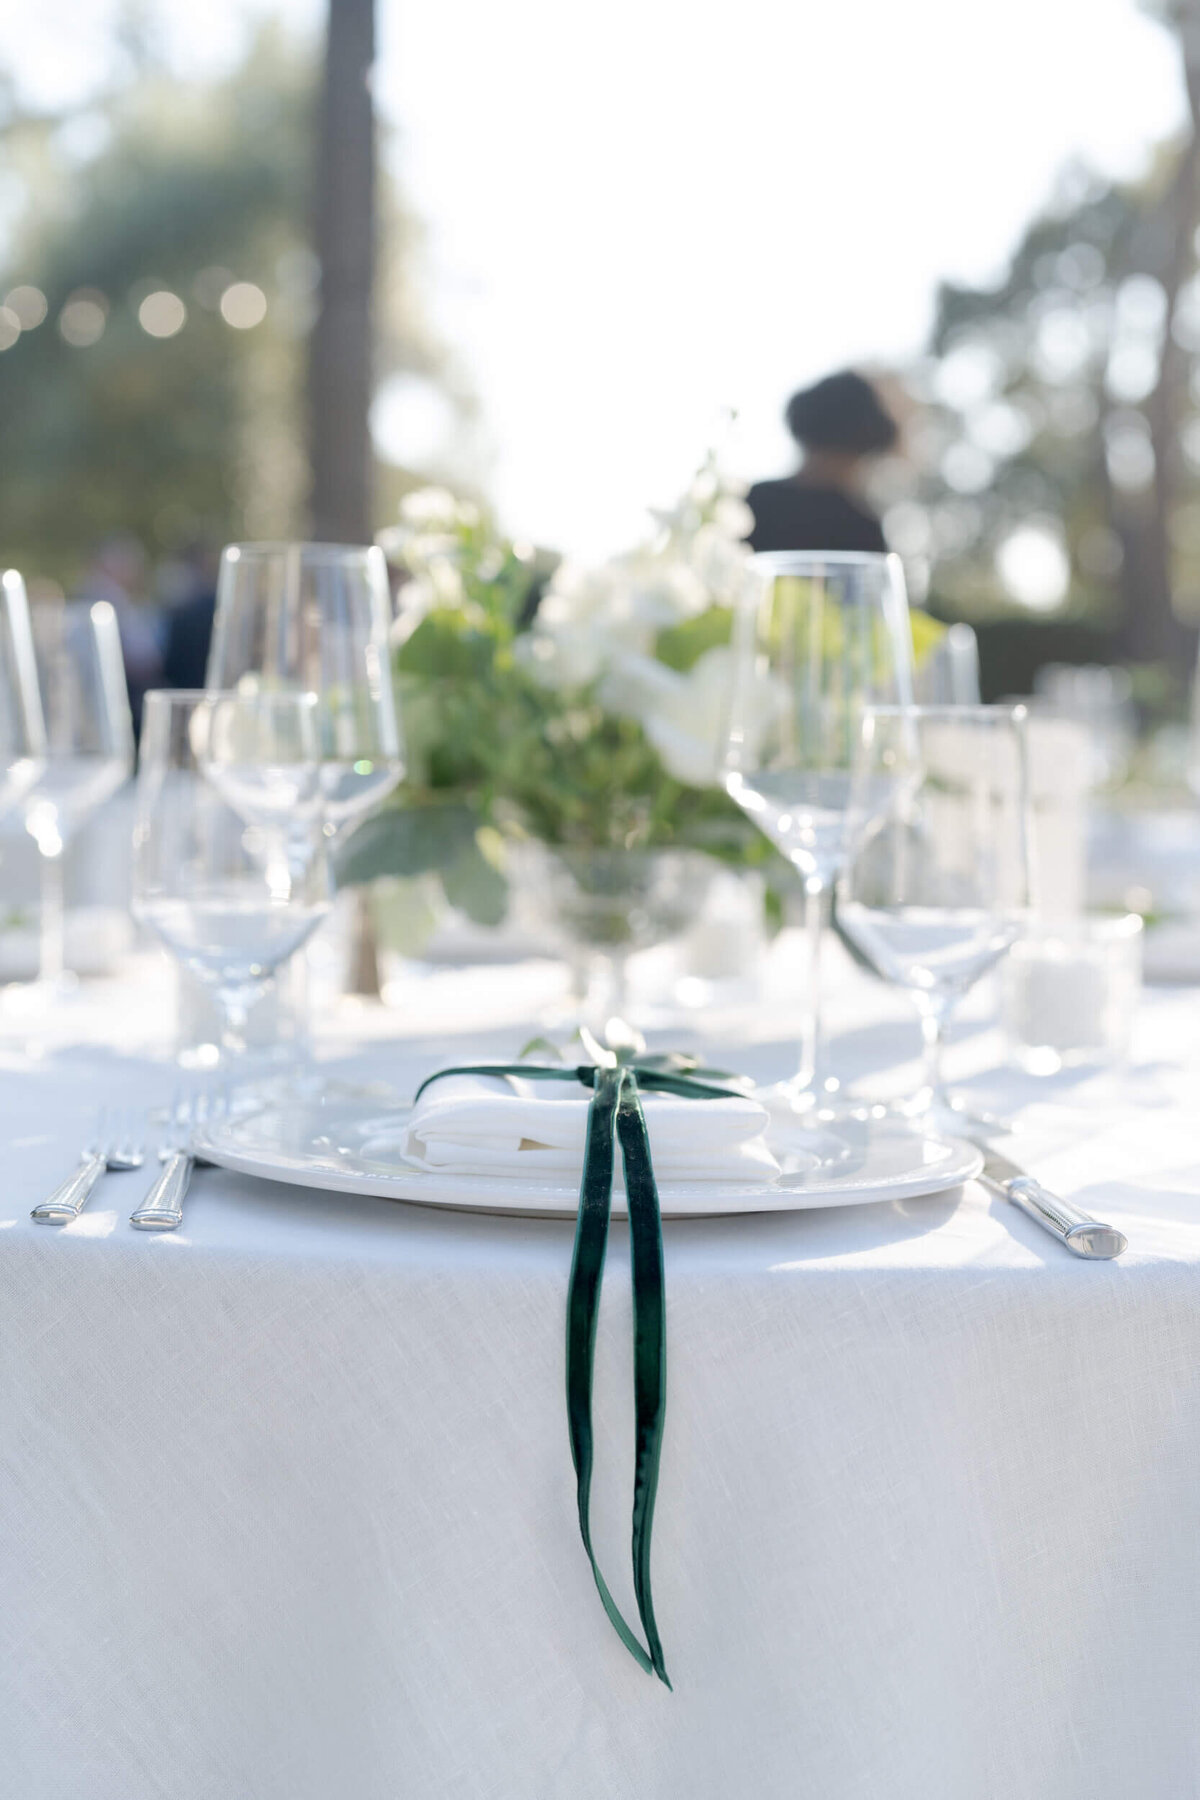 Classy glasses and table arrangements for a wedding.